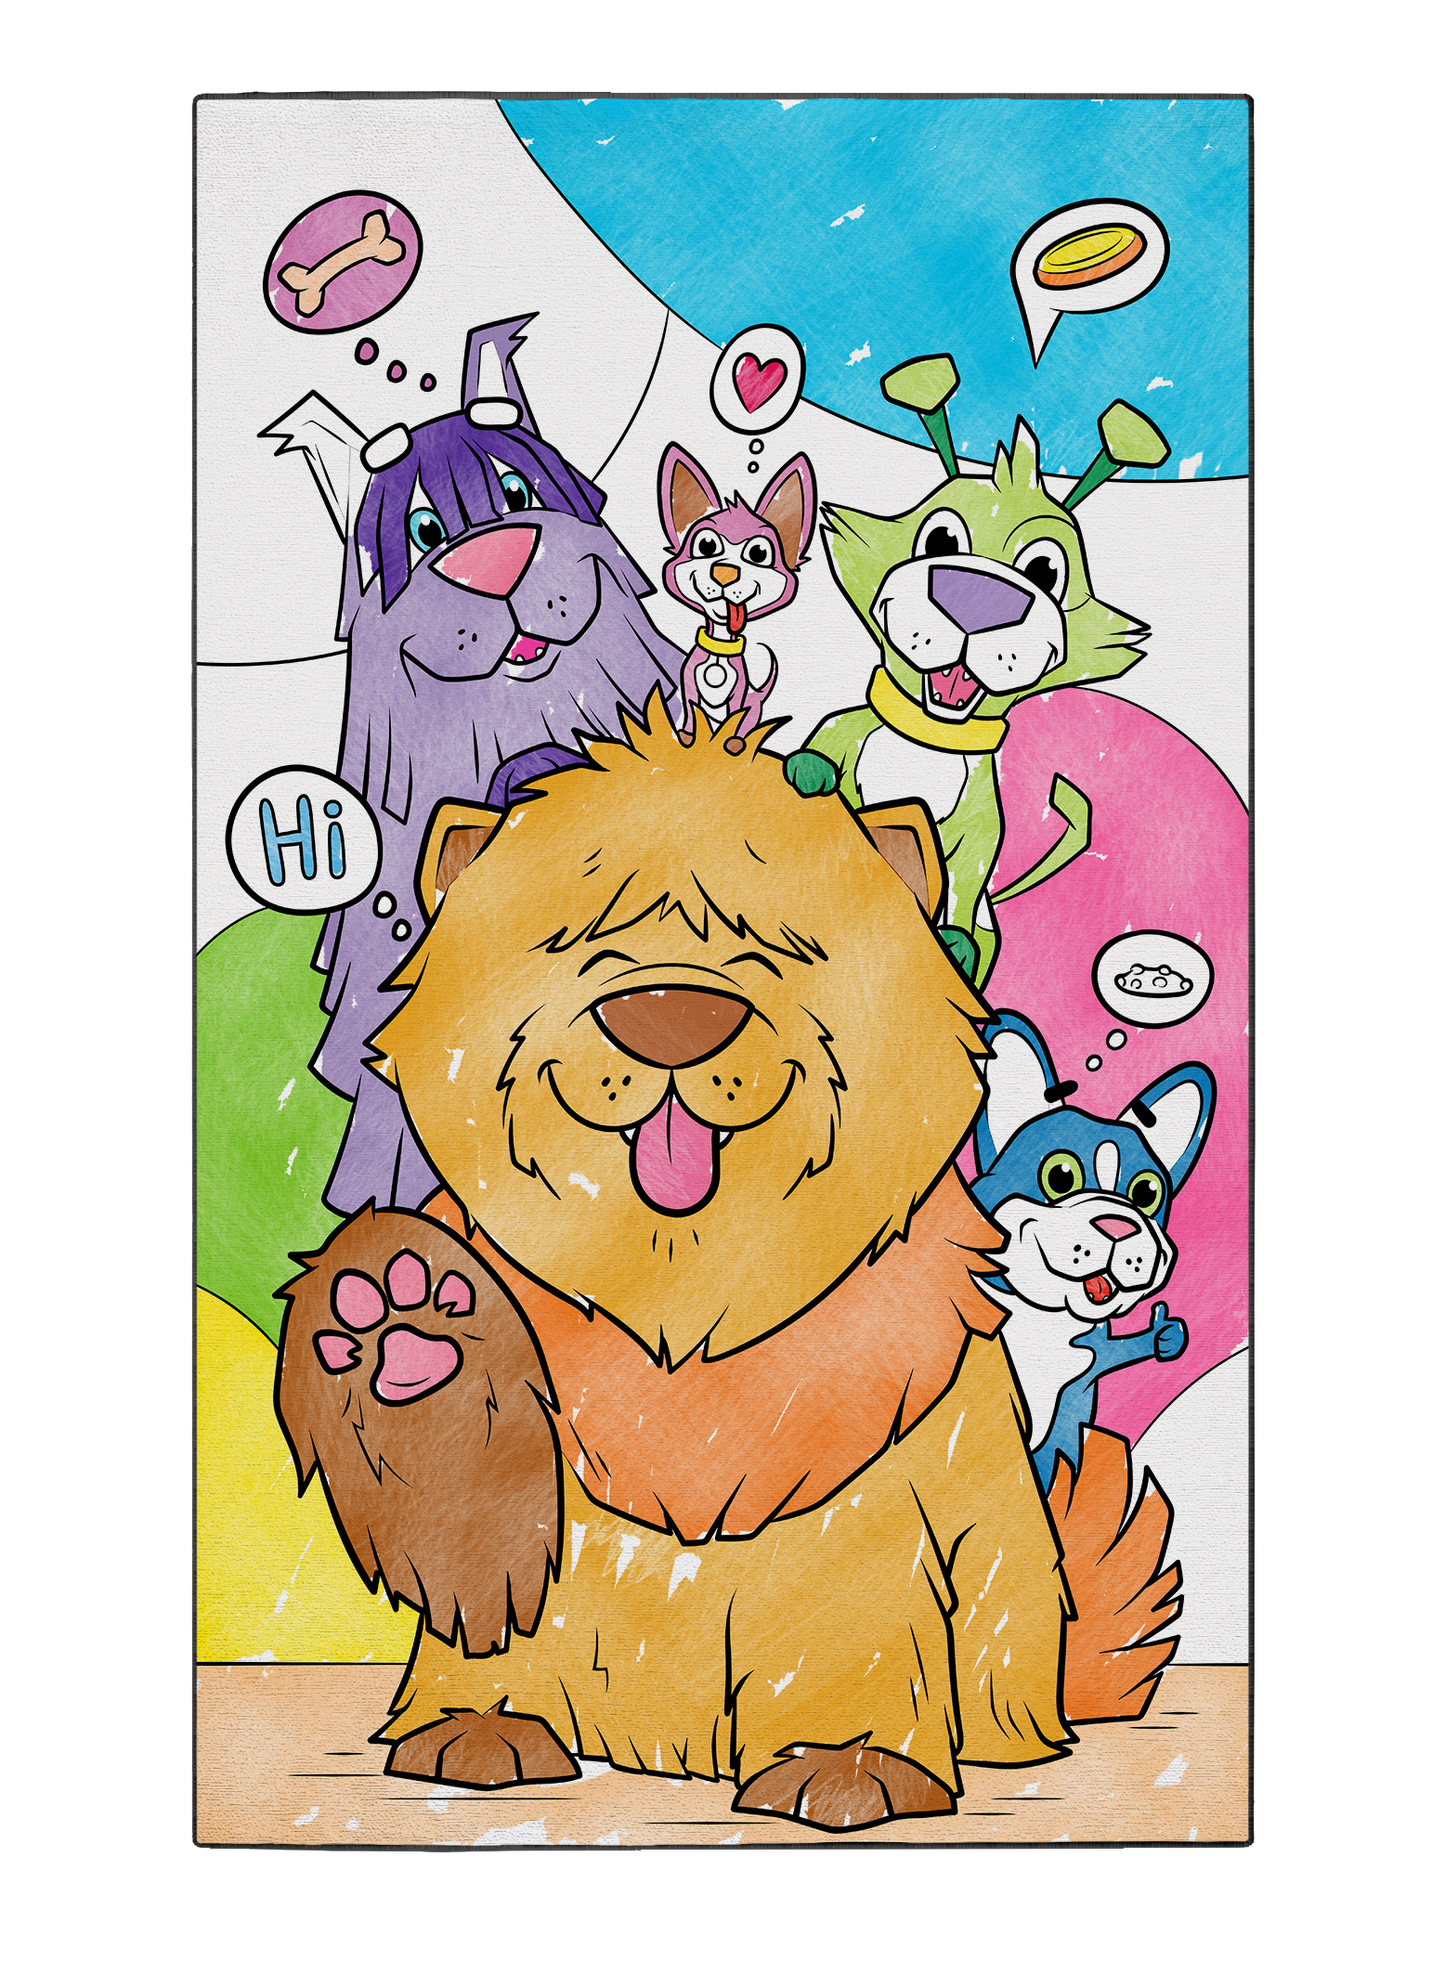 Coloring Poster "Bruno and Friends"